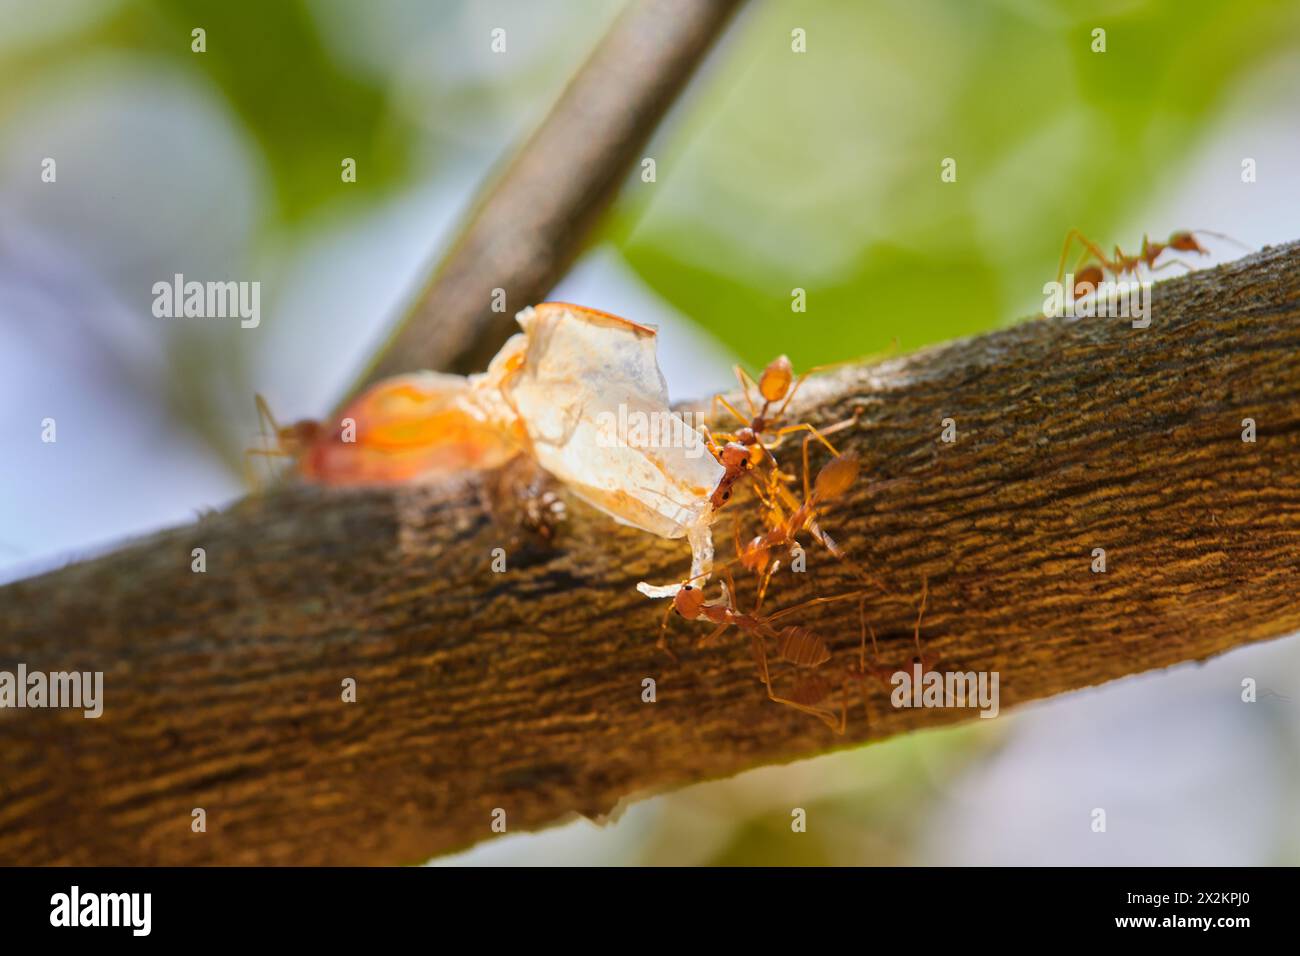 Close-up of weaver ants carrying food on tree branch Stock Photo